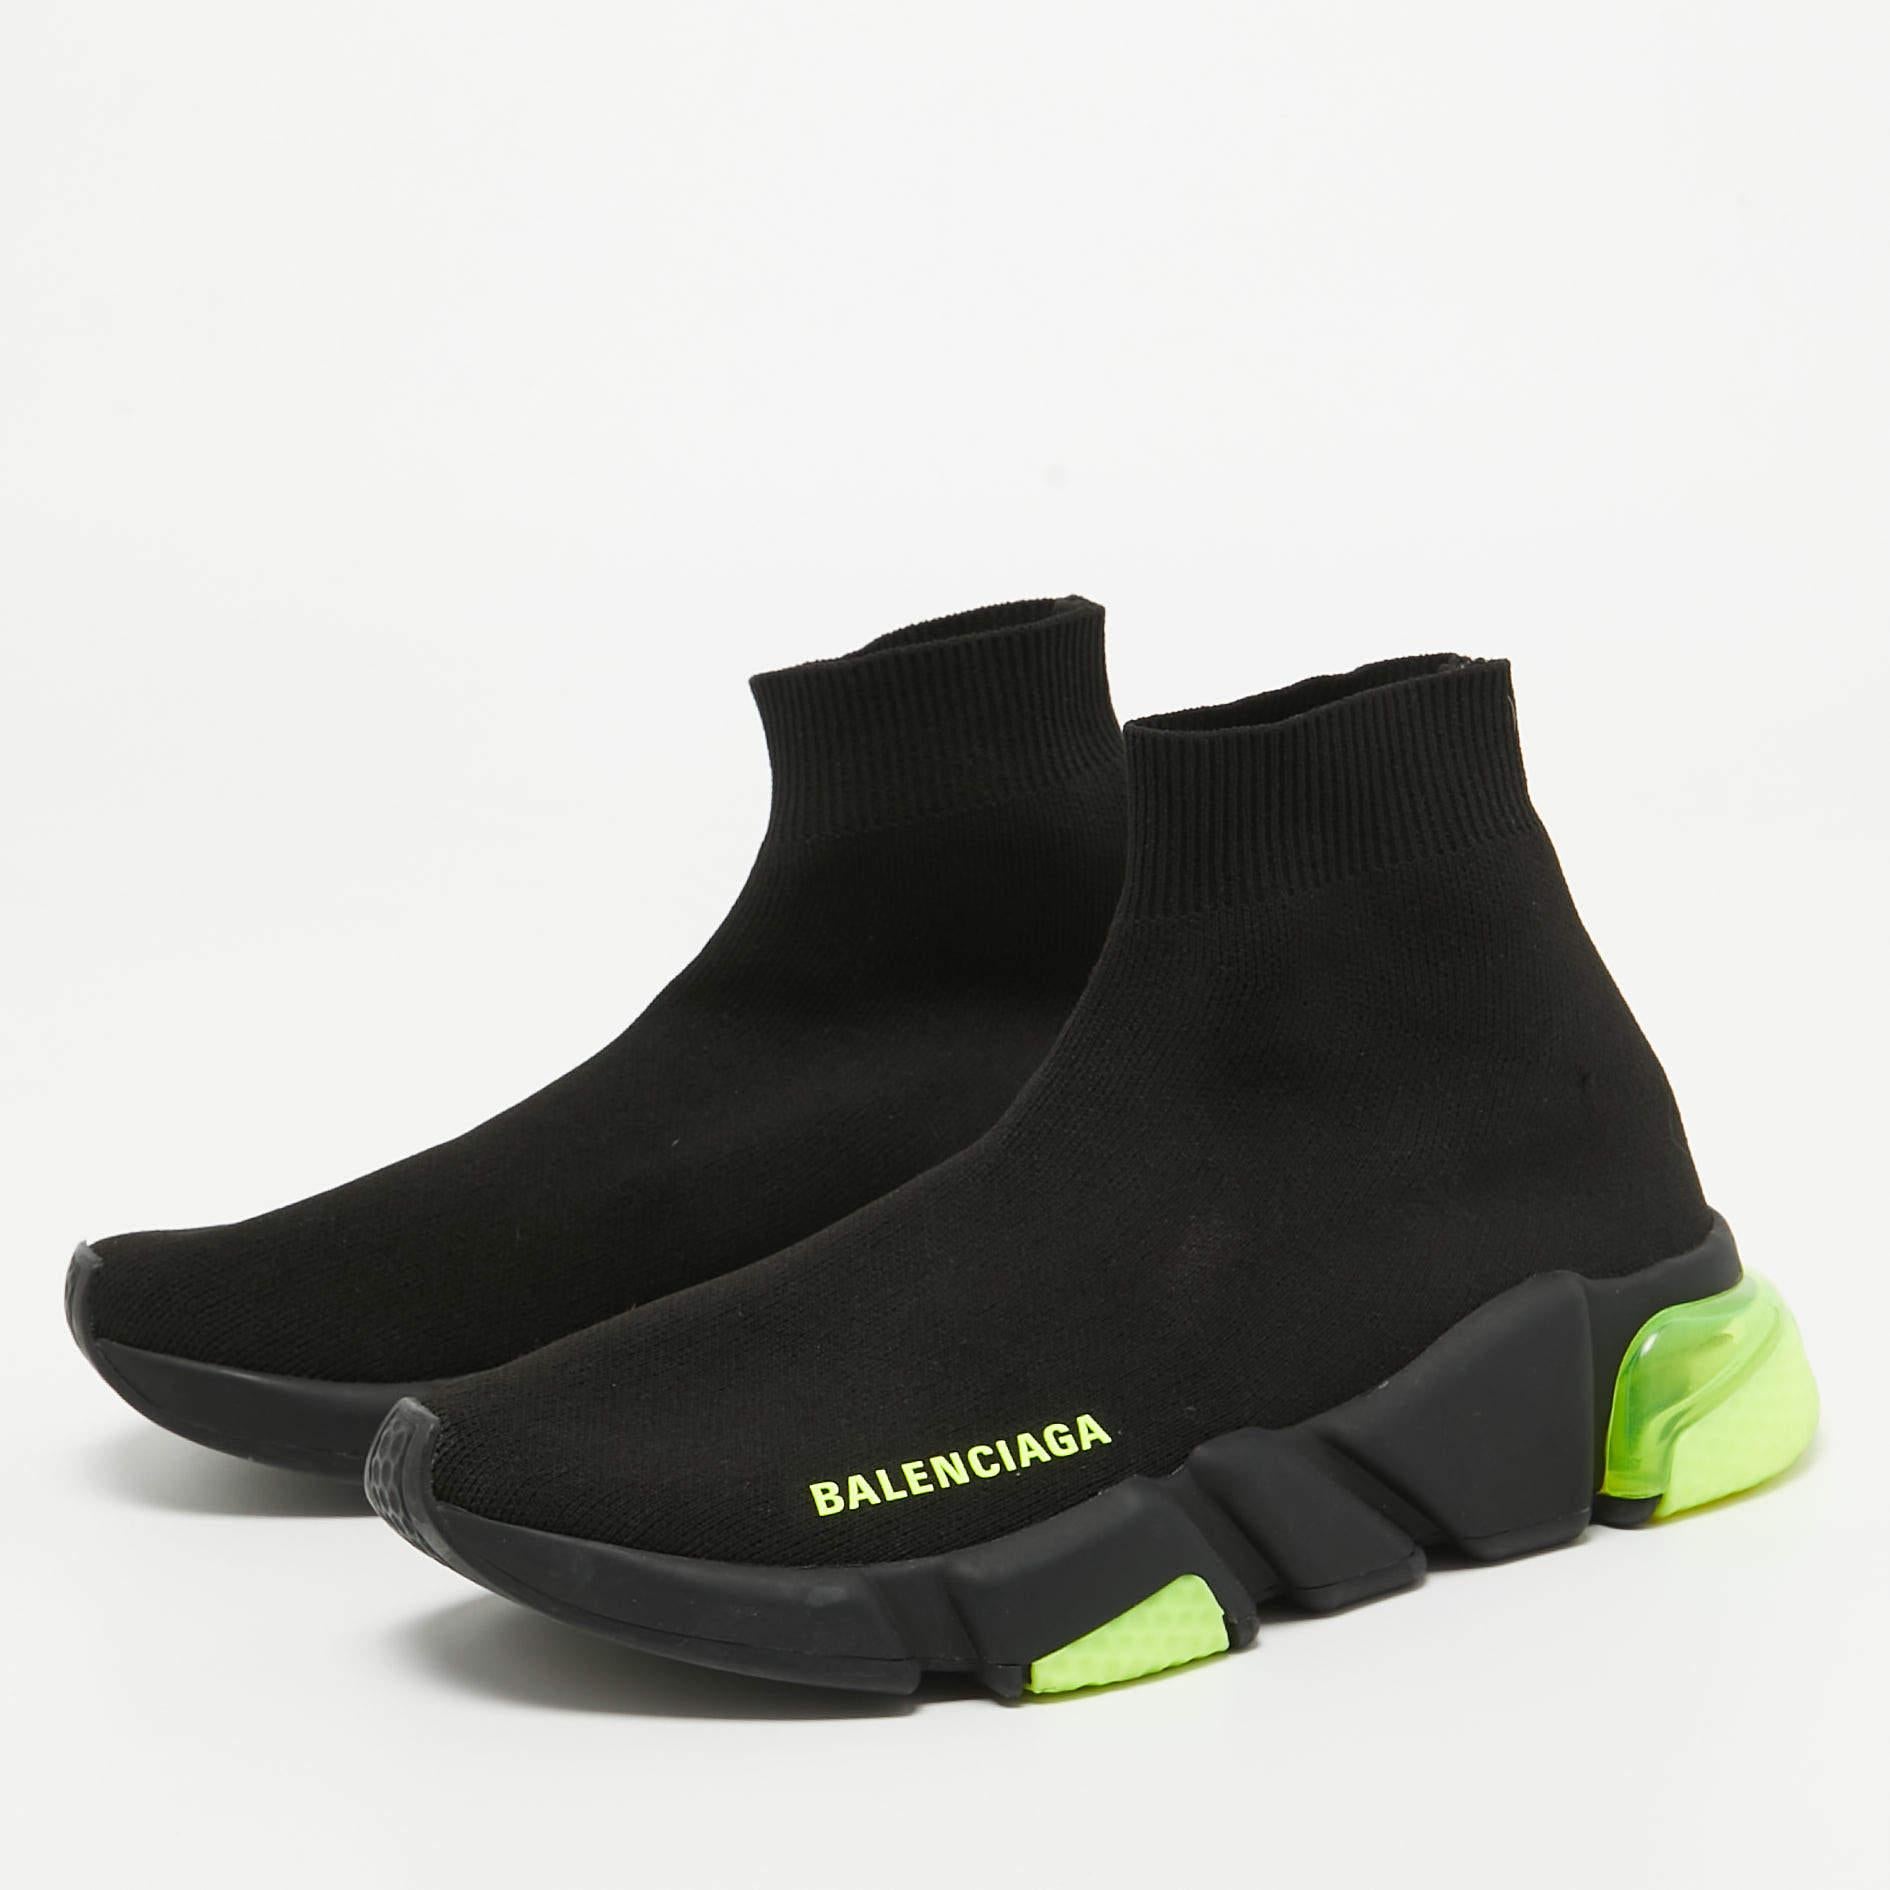 Celebrating the fusion of sports and luxury fashion, these Balenciaga Speed Trainer sneakers are absolutely worth the splurge. They are laceless and so well-crafted with logo-accented knit fabric in a sock style. The sneakers are also designed with